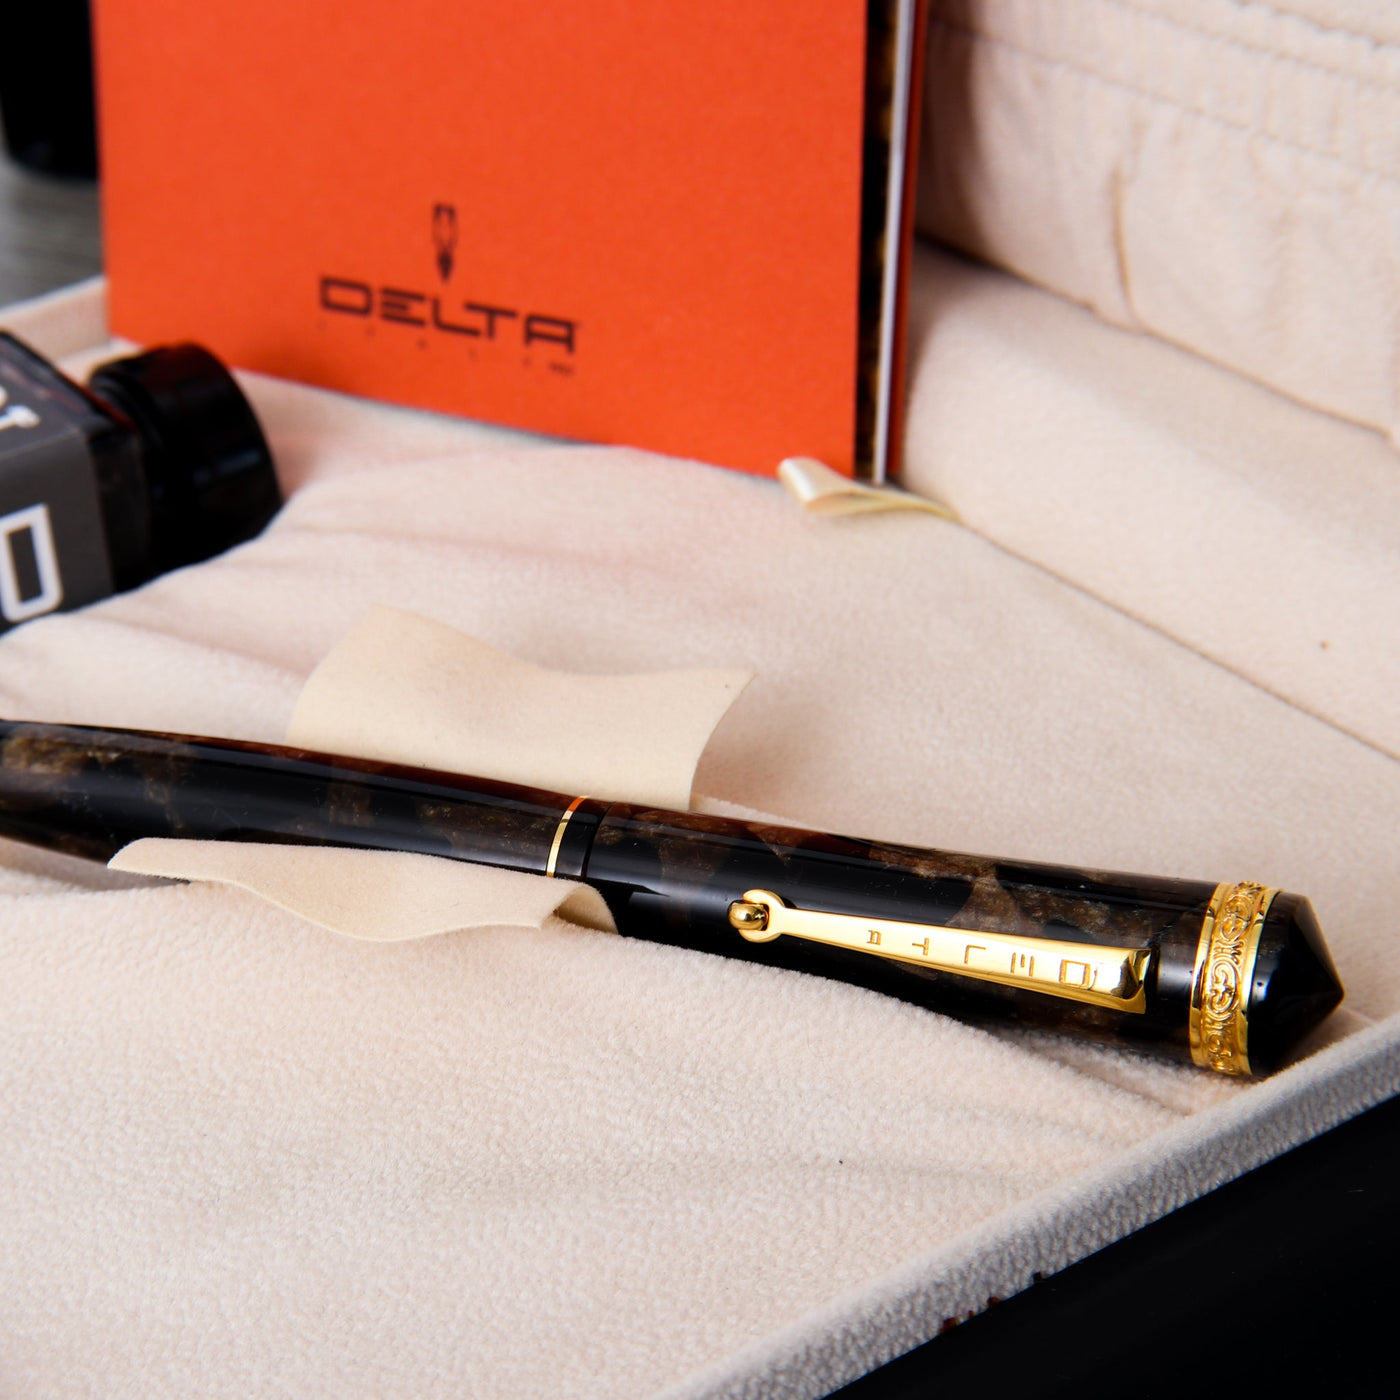 Delta 39+1 Limited Edition Celluloid Fountain Pen With Pompeiian Inspired Design On Cap